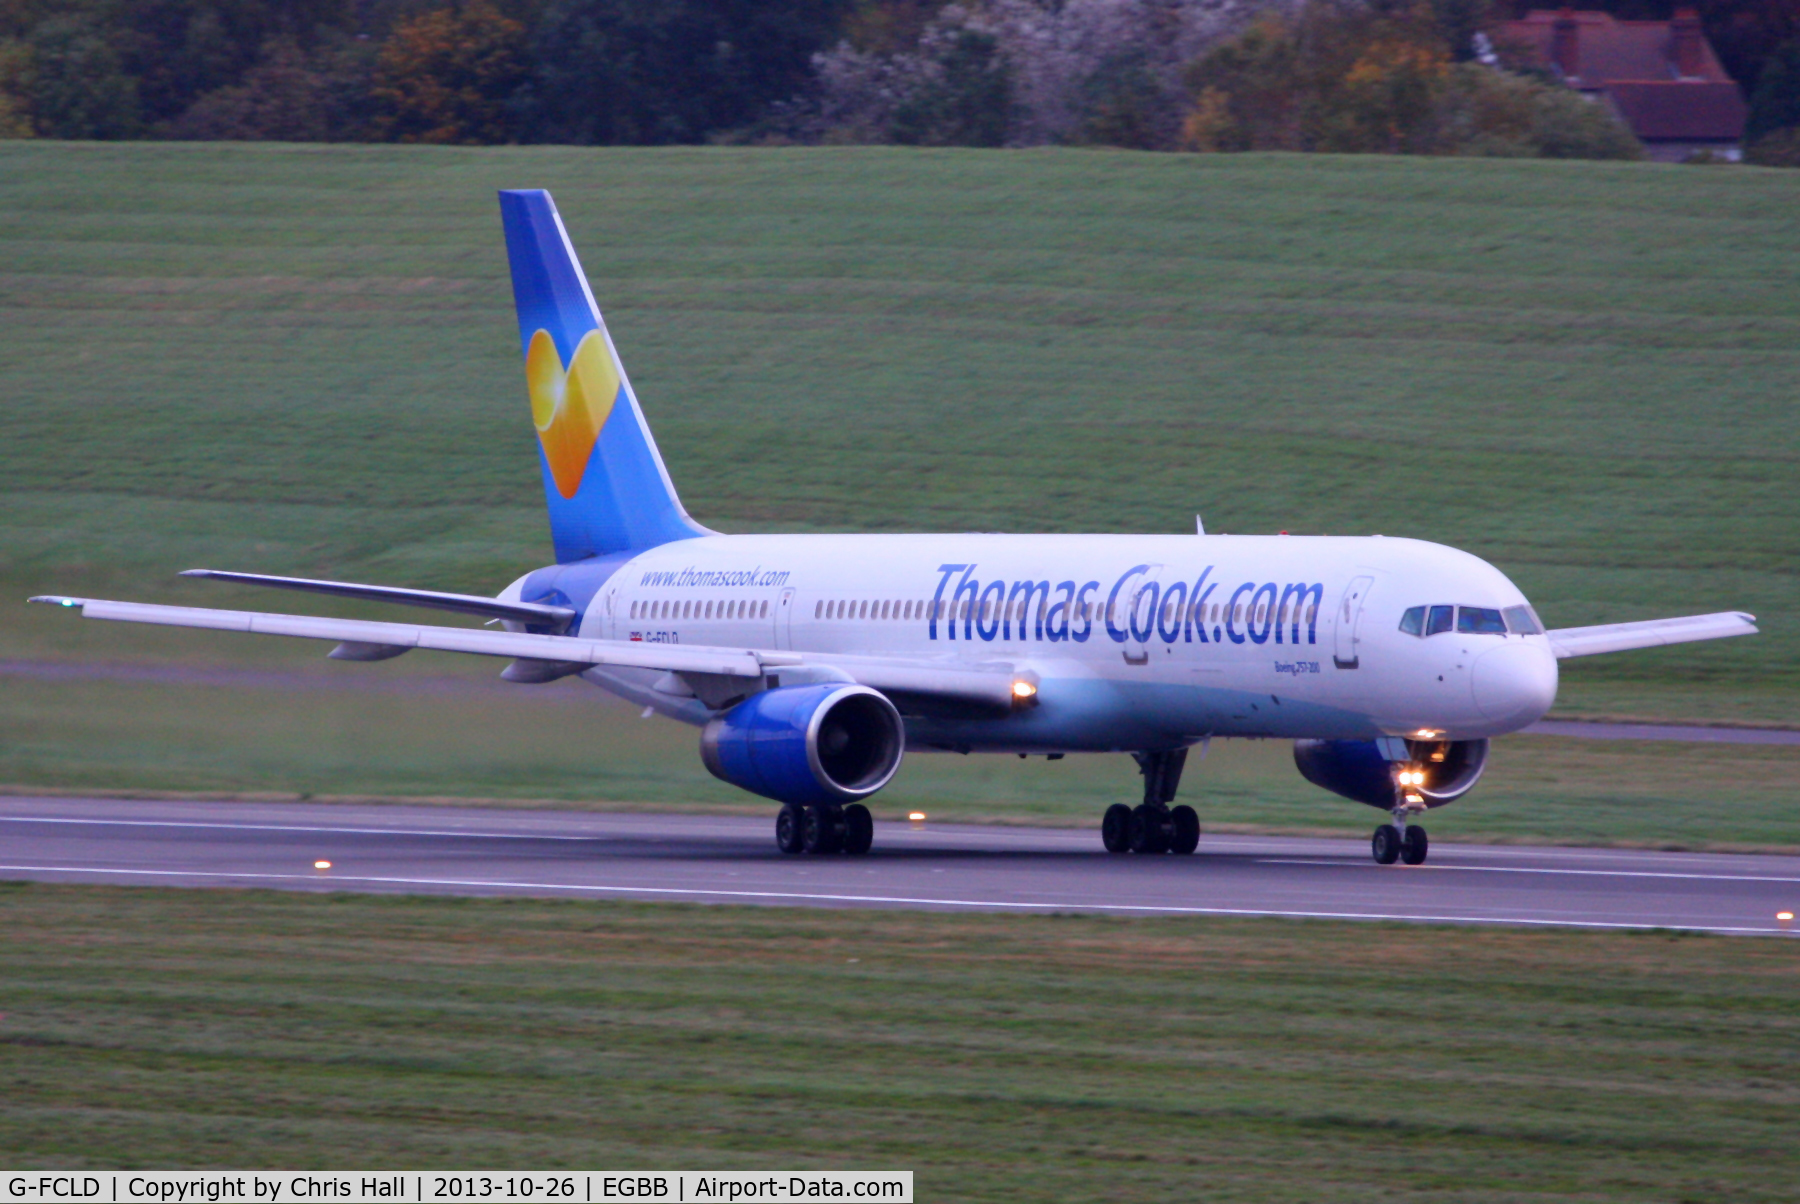 G-FCLD, 1997 Boeing 757-25F C/N 28718, Thomas Cook's new 